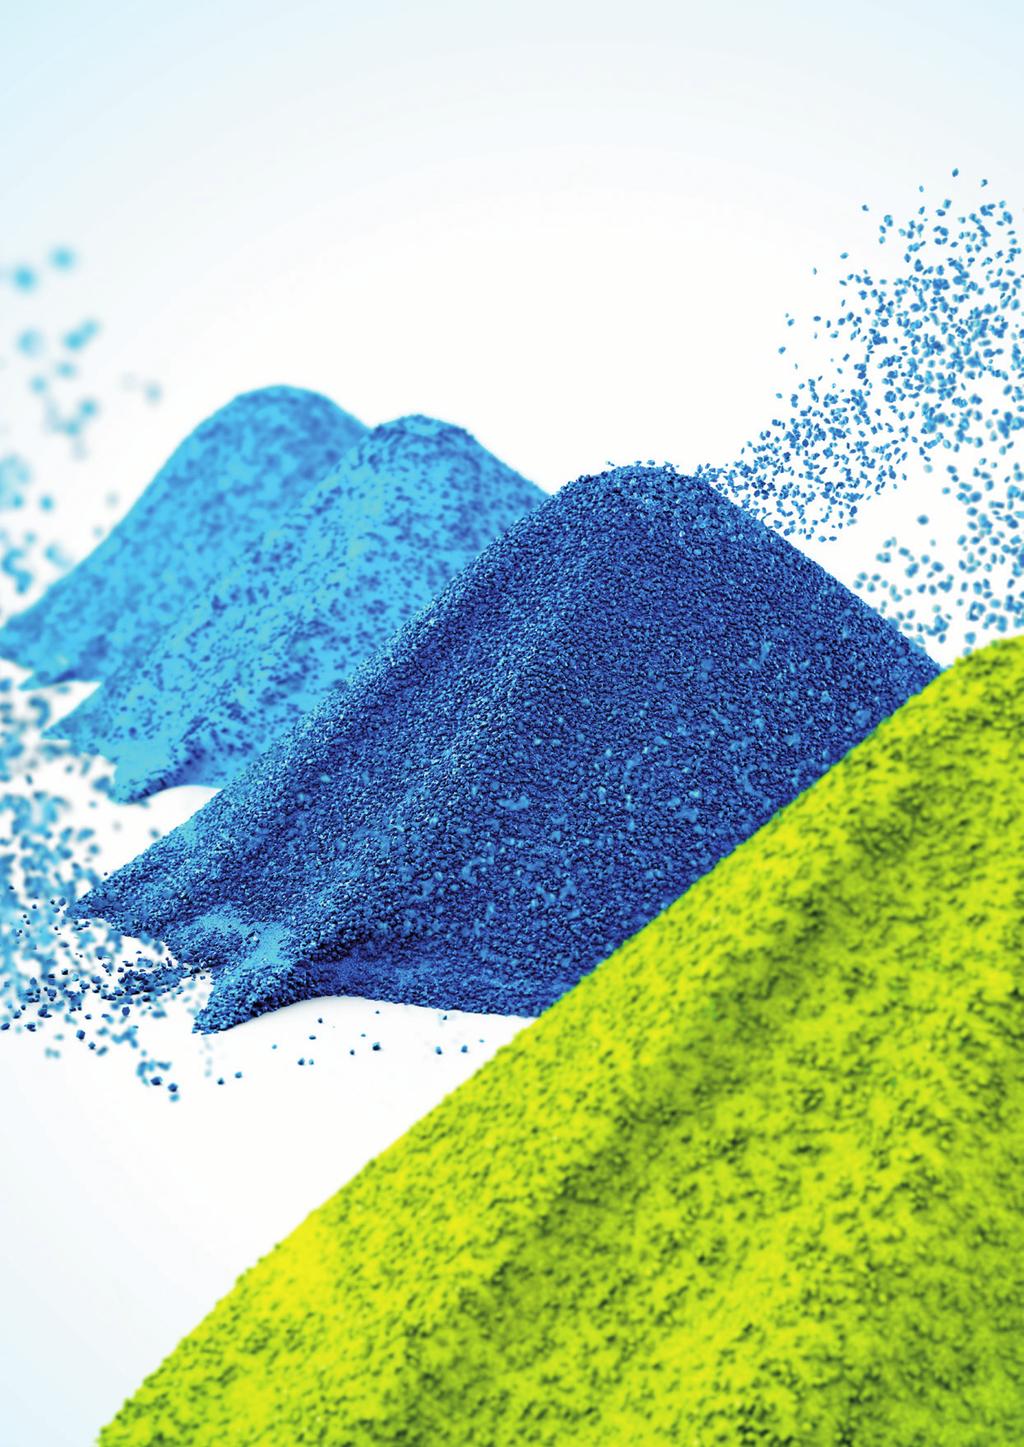 Explore The Dynamics of World-Leading Trade Fair for Processing, Analysis, and Handling of Powder and Bulk Solids